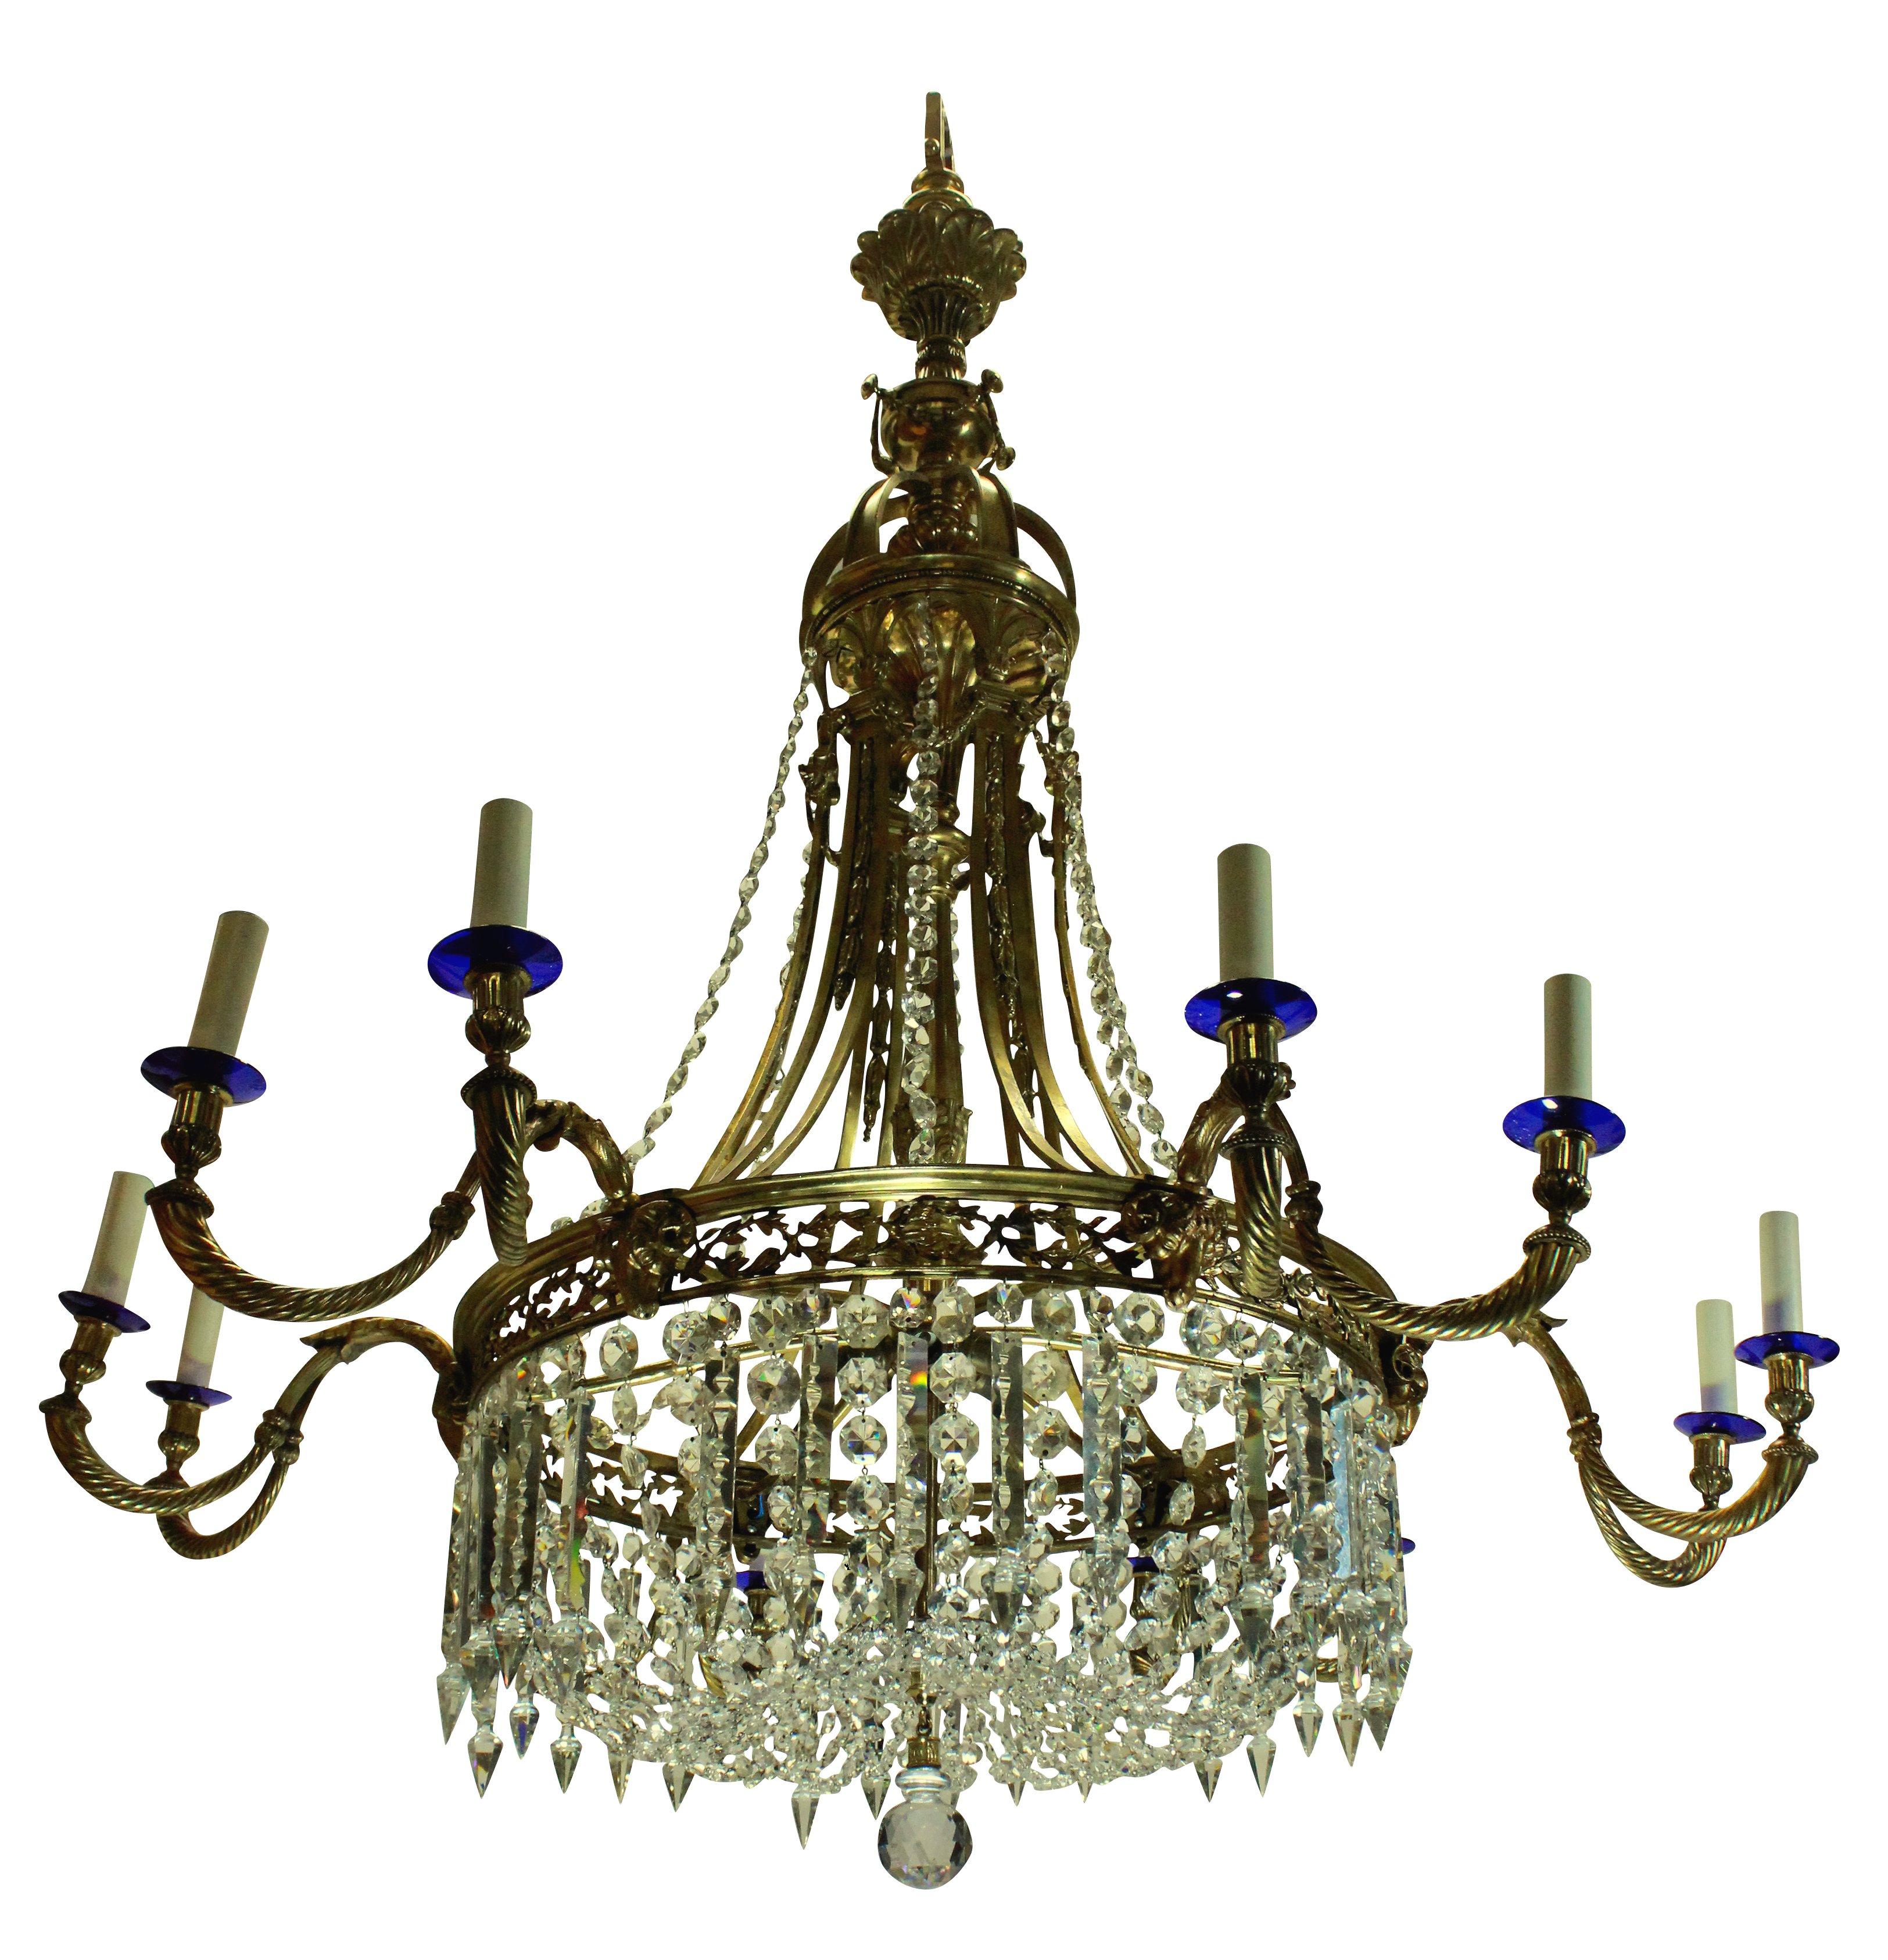 A large English Regency style gilt bronze and cut glass chandelier of fine quality. Formerly from Salperton Park, Gloucestershire.